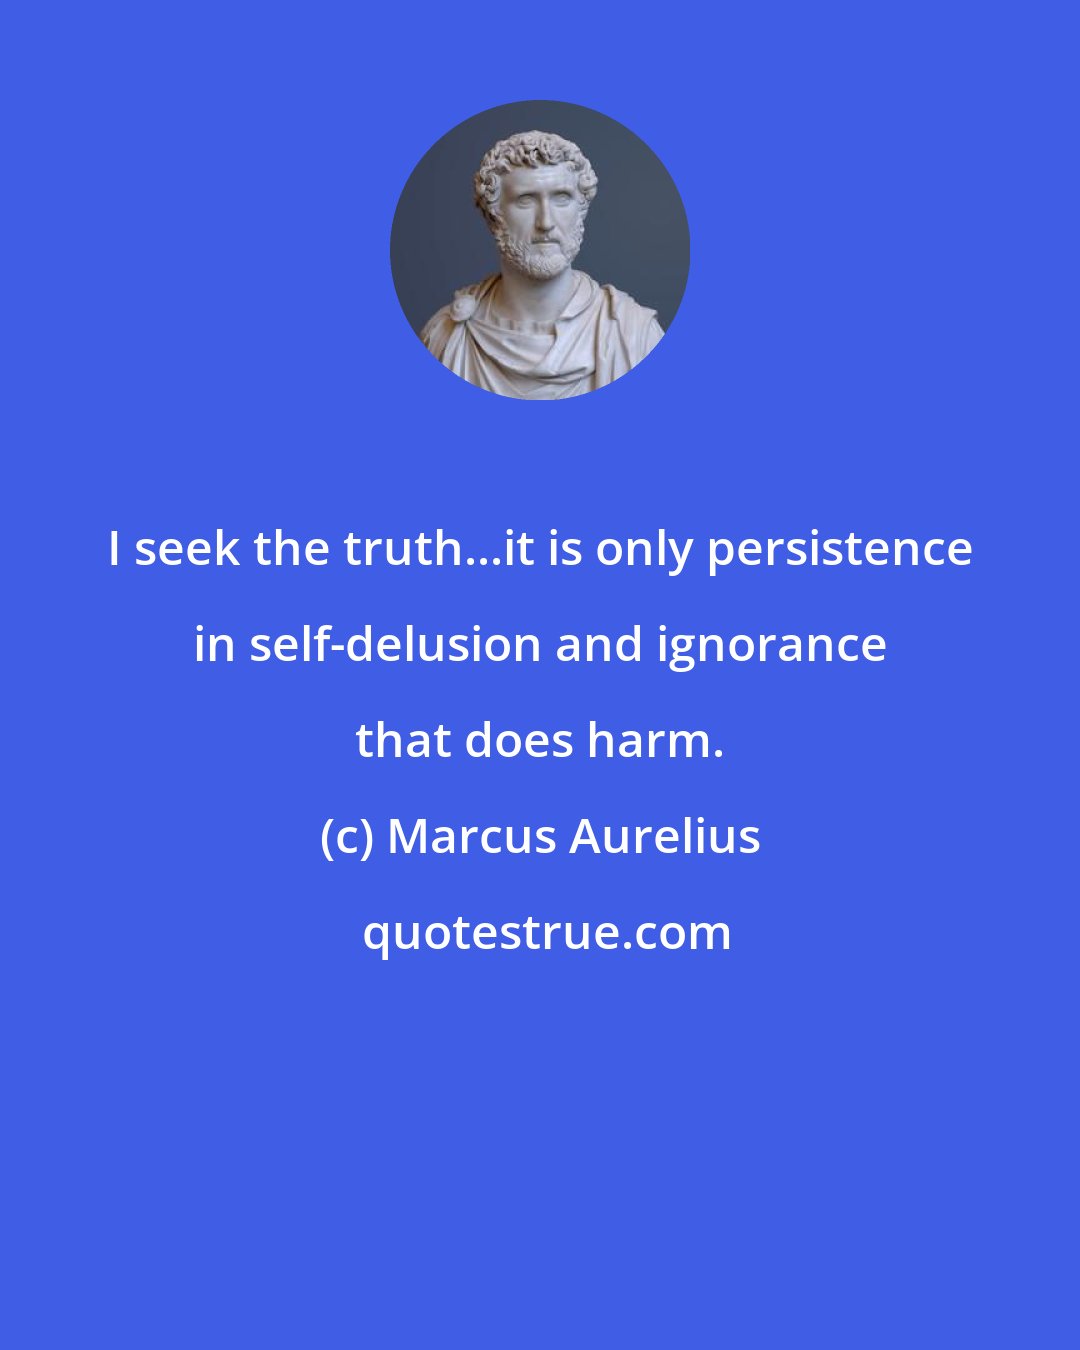 Marcus Aurelius: I seek the truth...it is only persistence in self-delusion and ignorance that does harm.